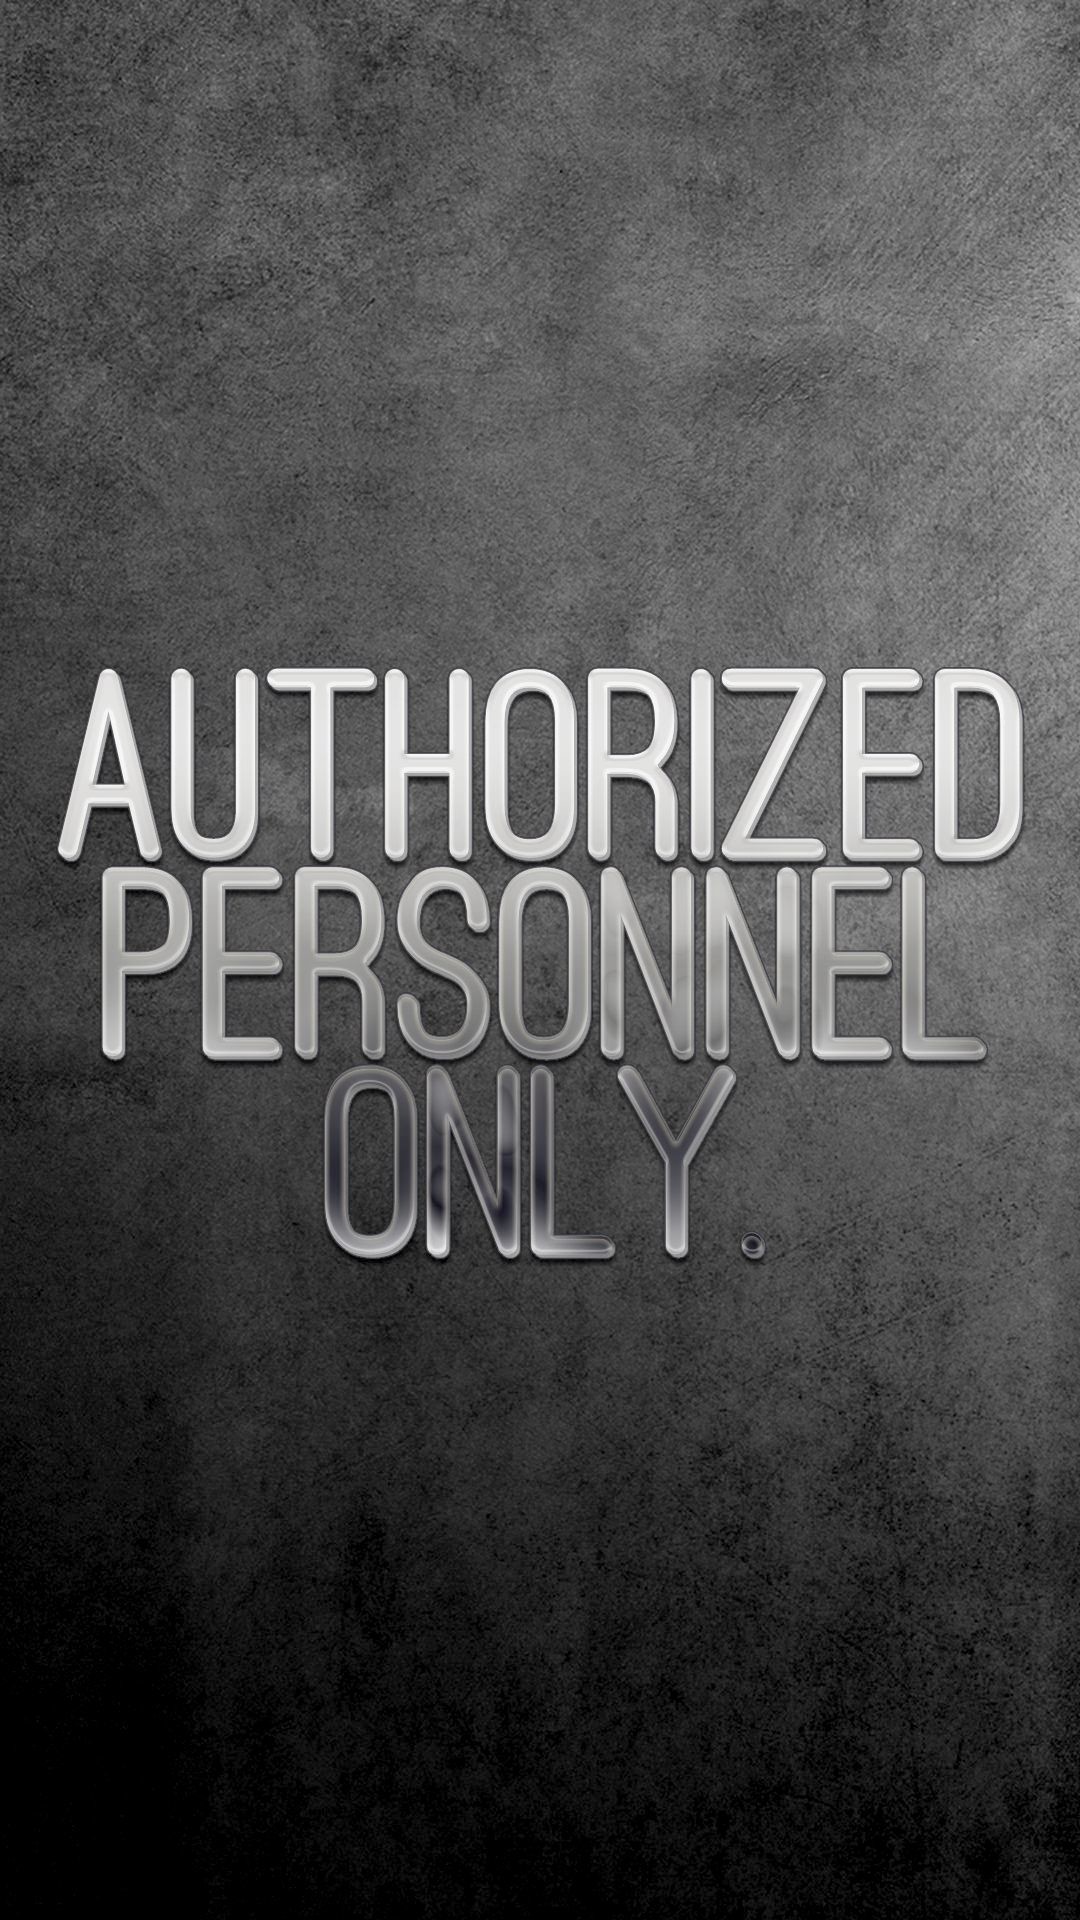 1080x1920 [Lock screen] "AuTHORIZED PERSONNEL ONLY" | iPhone Wallpaper